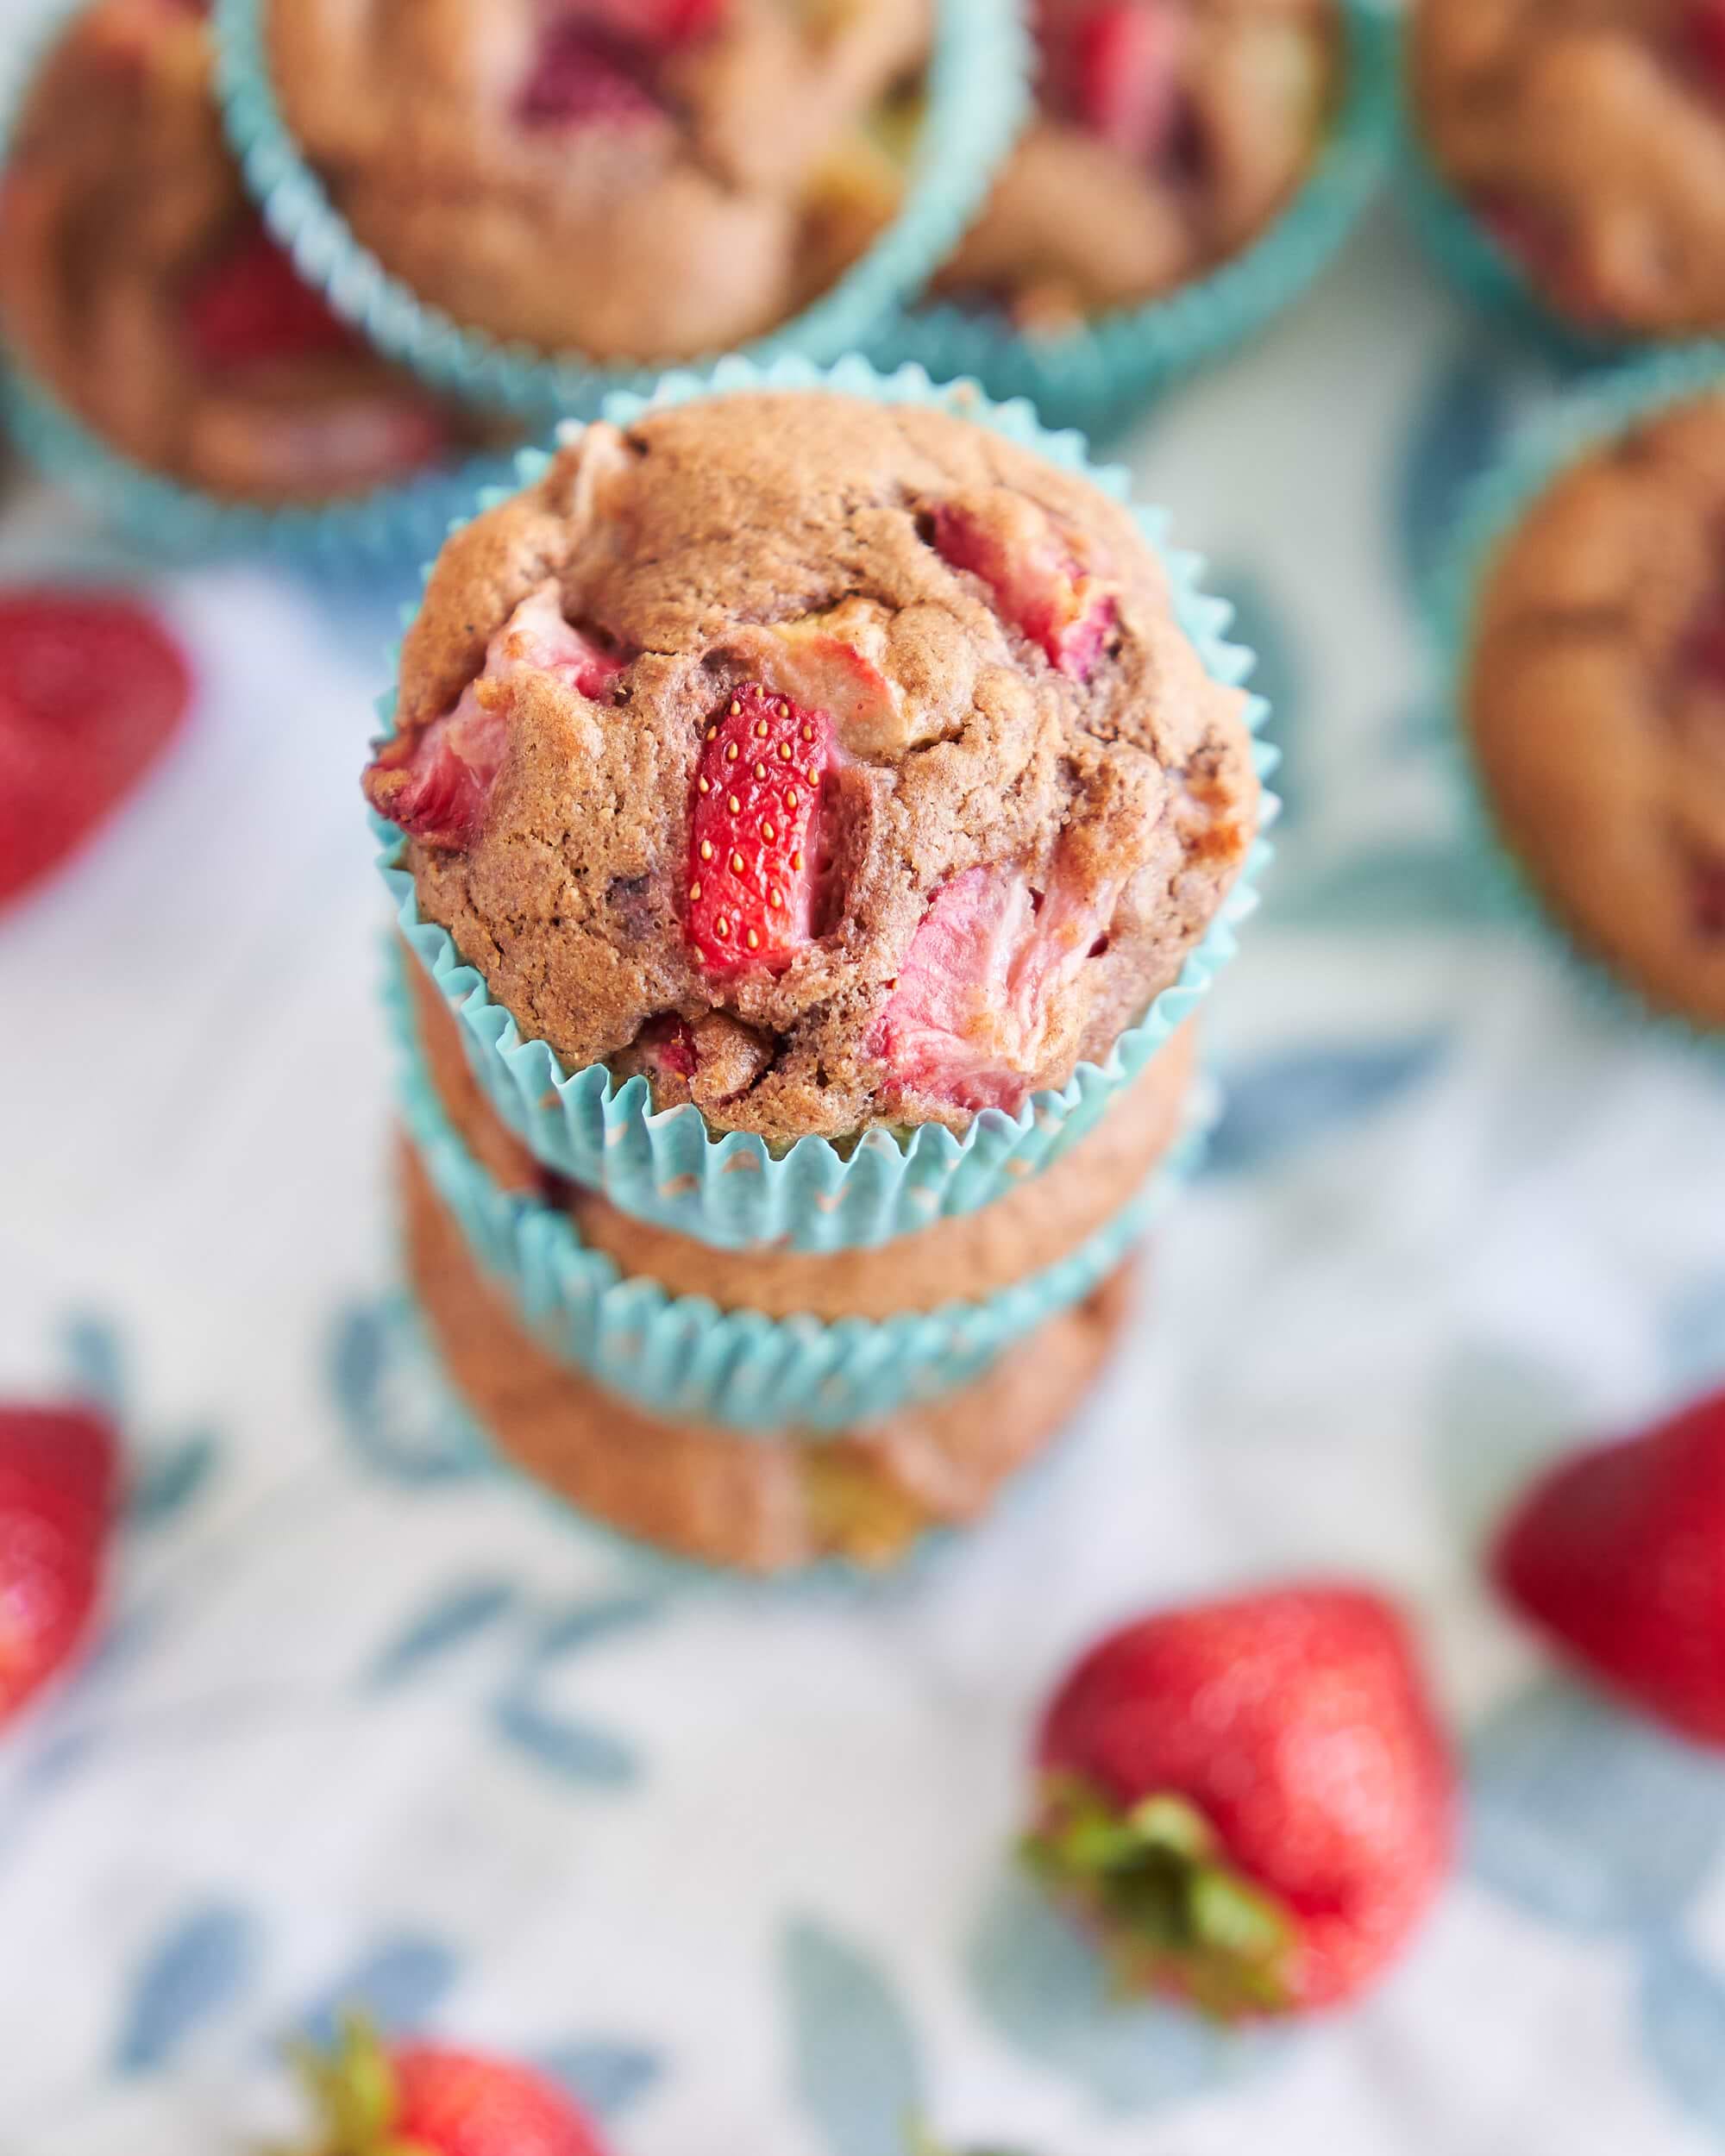 Top of a Strawberry Rhubarb Muffin.